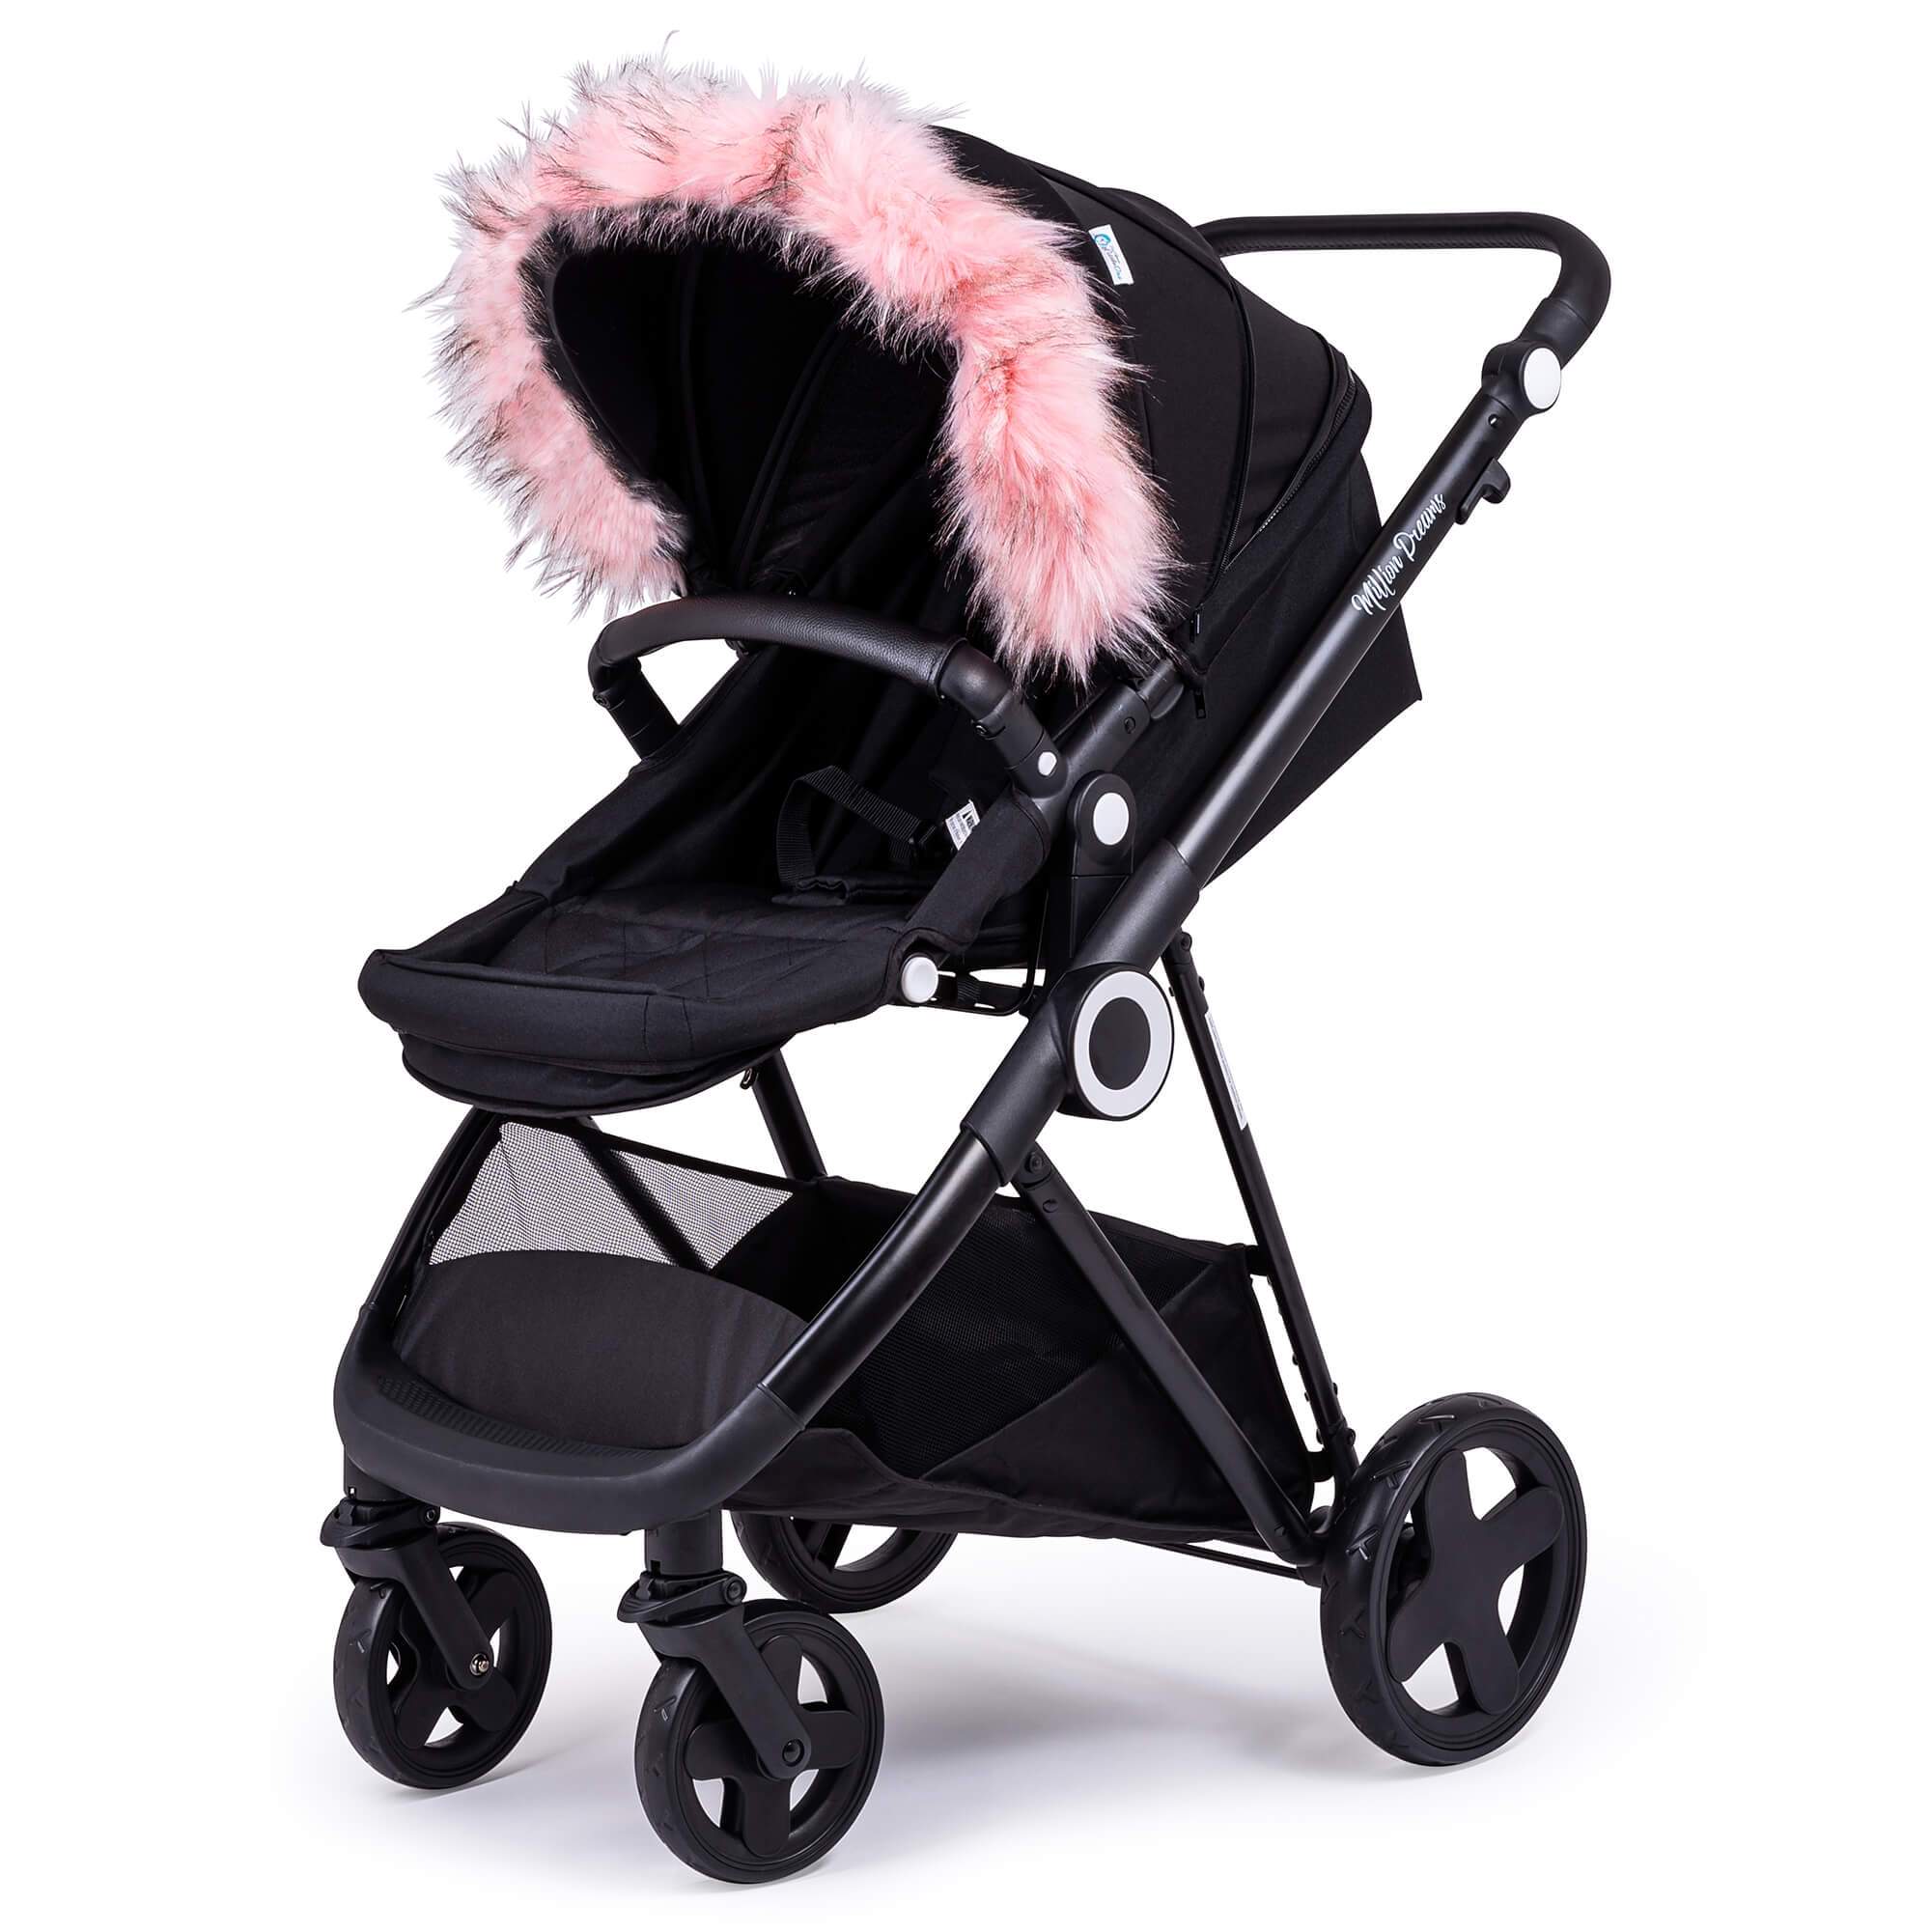 Pram Fur Hood Trim Attachment for Pushchair Compatible with I'coo - Light Pink / Fits All Models | For Your Little One